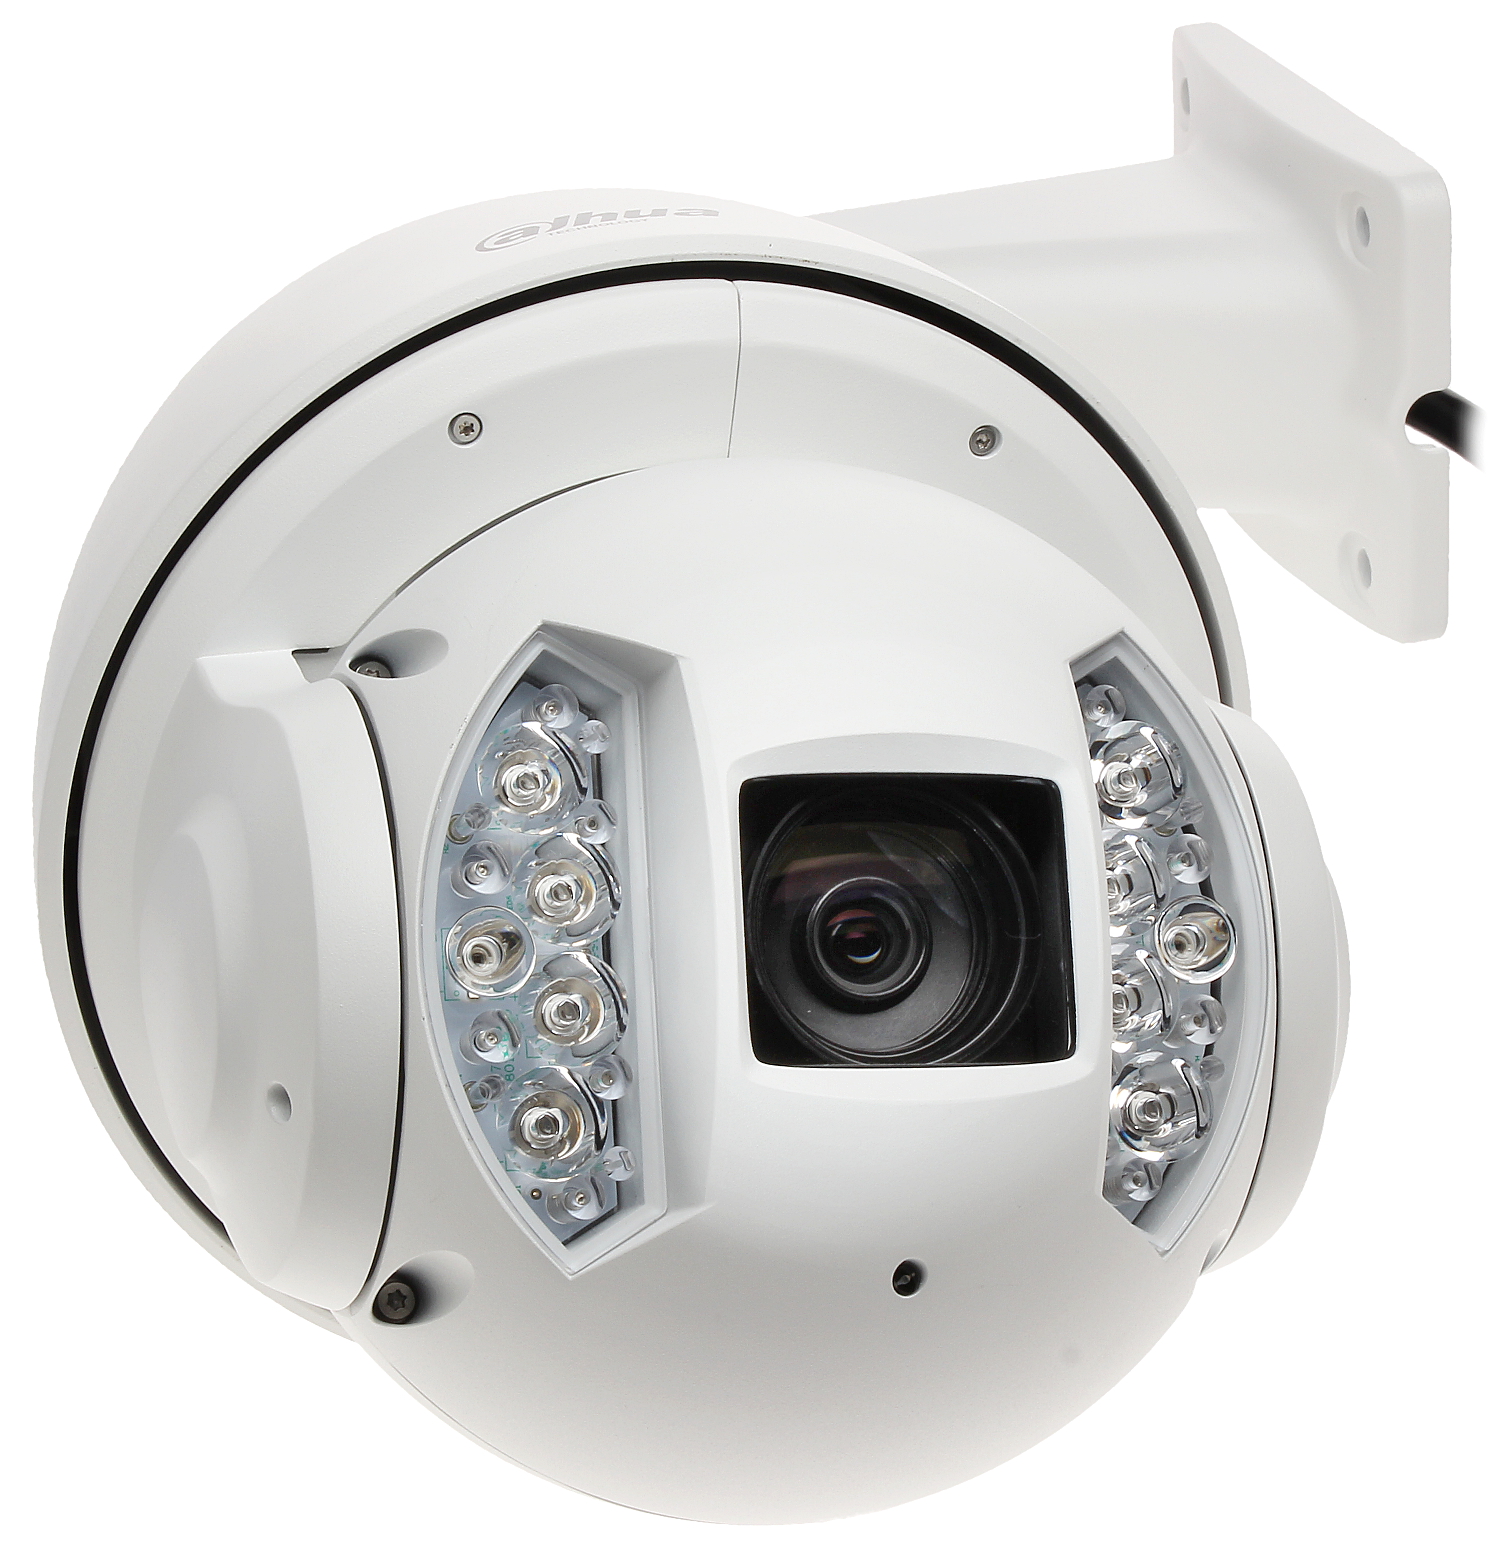 IP SPEED DOME CAMERA OUTDOOR SD6AE830V-HNI - 12 Mpx 6  - With 